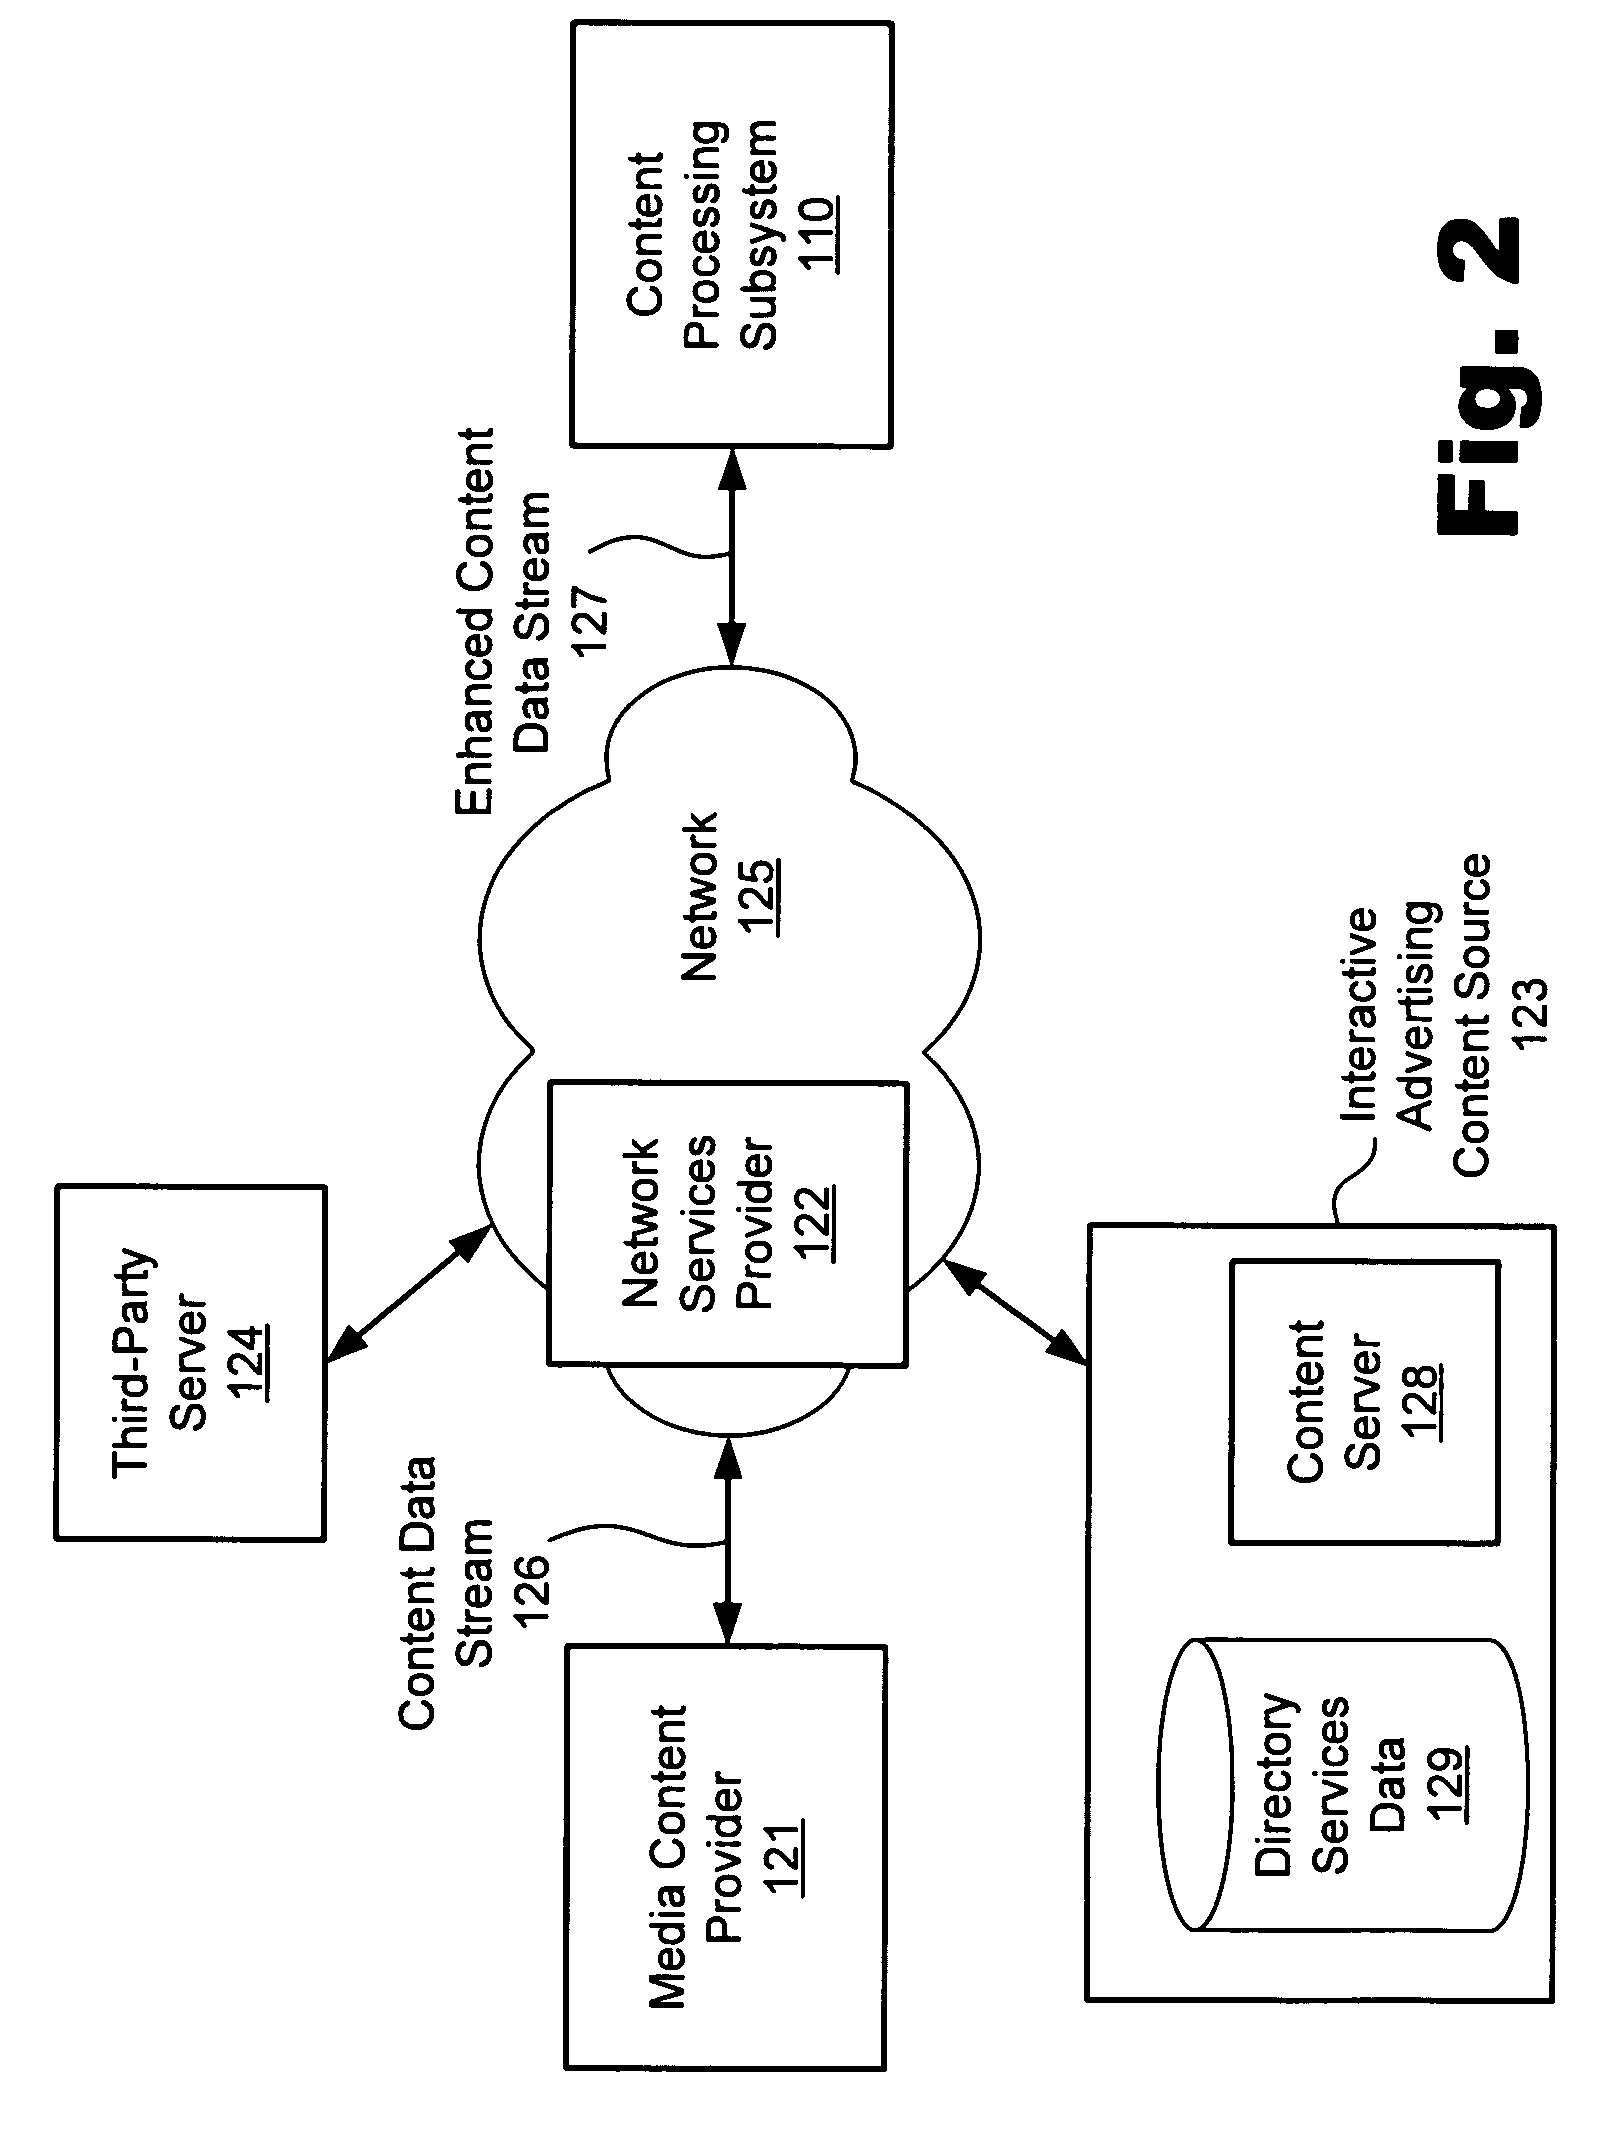 Interactive content for media content access systems and methods